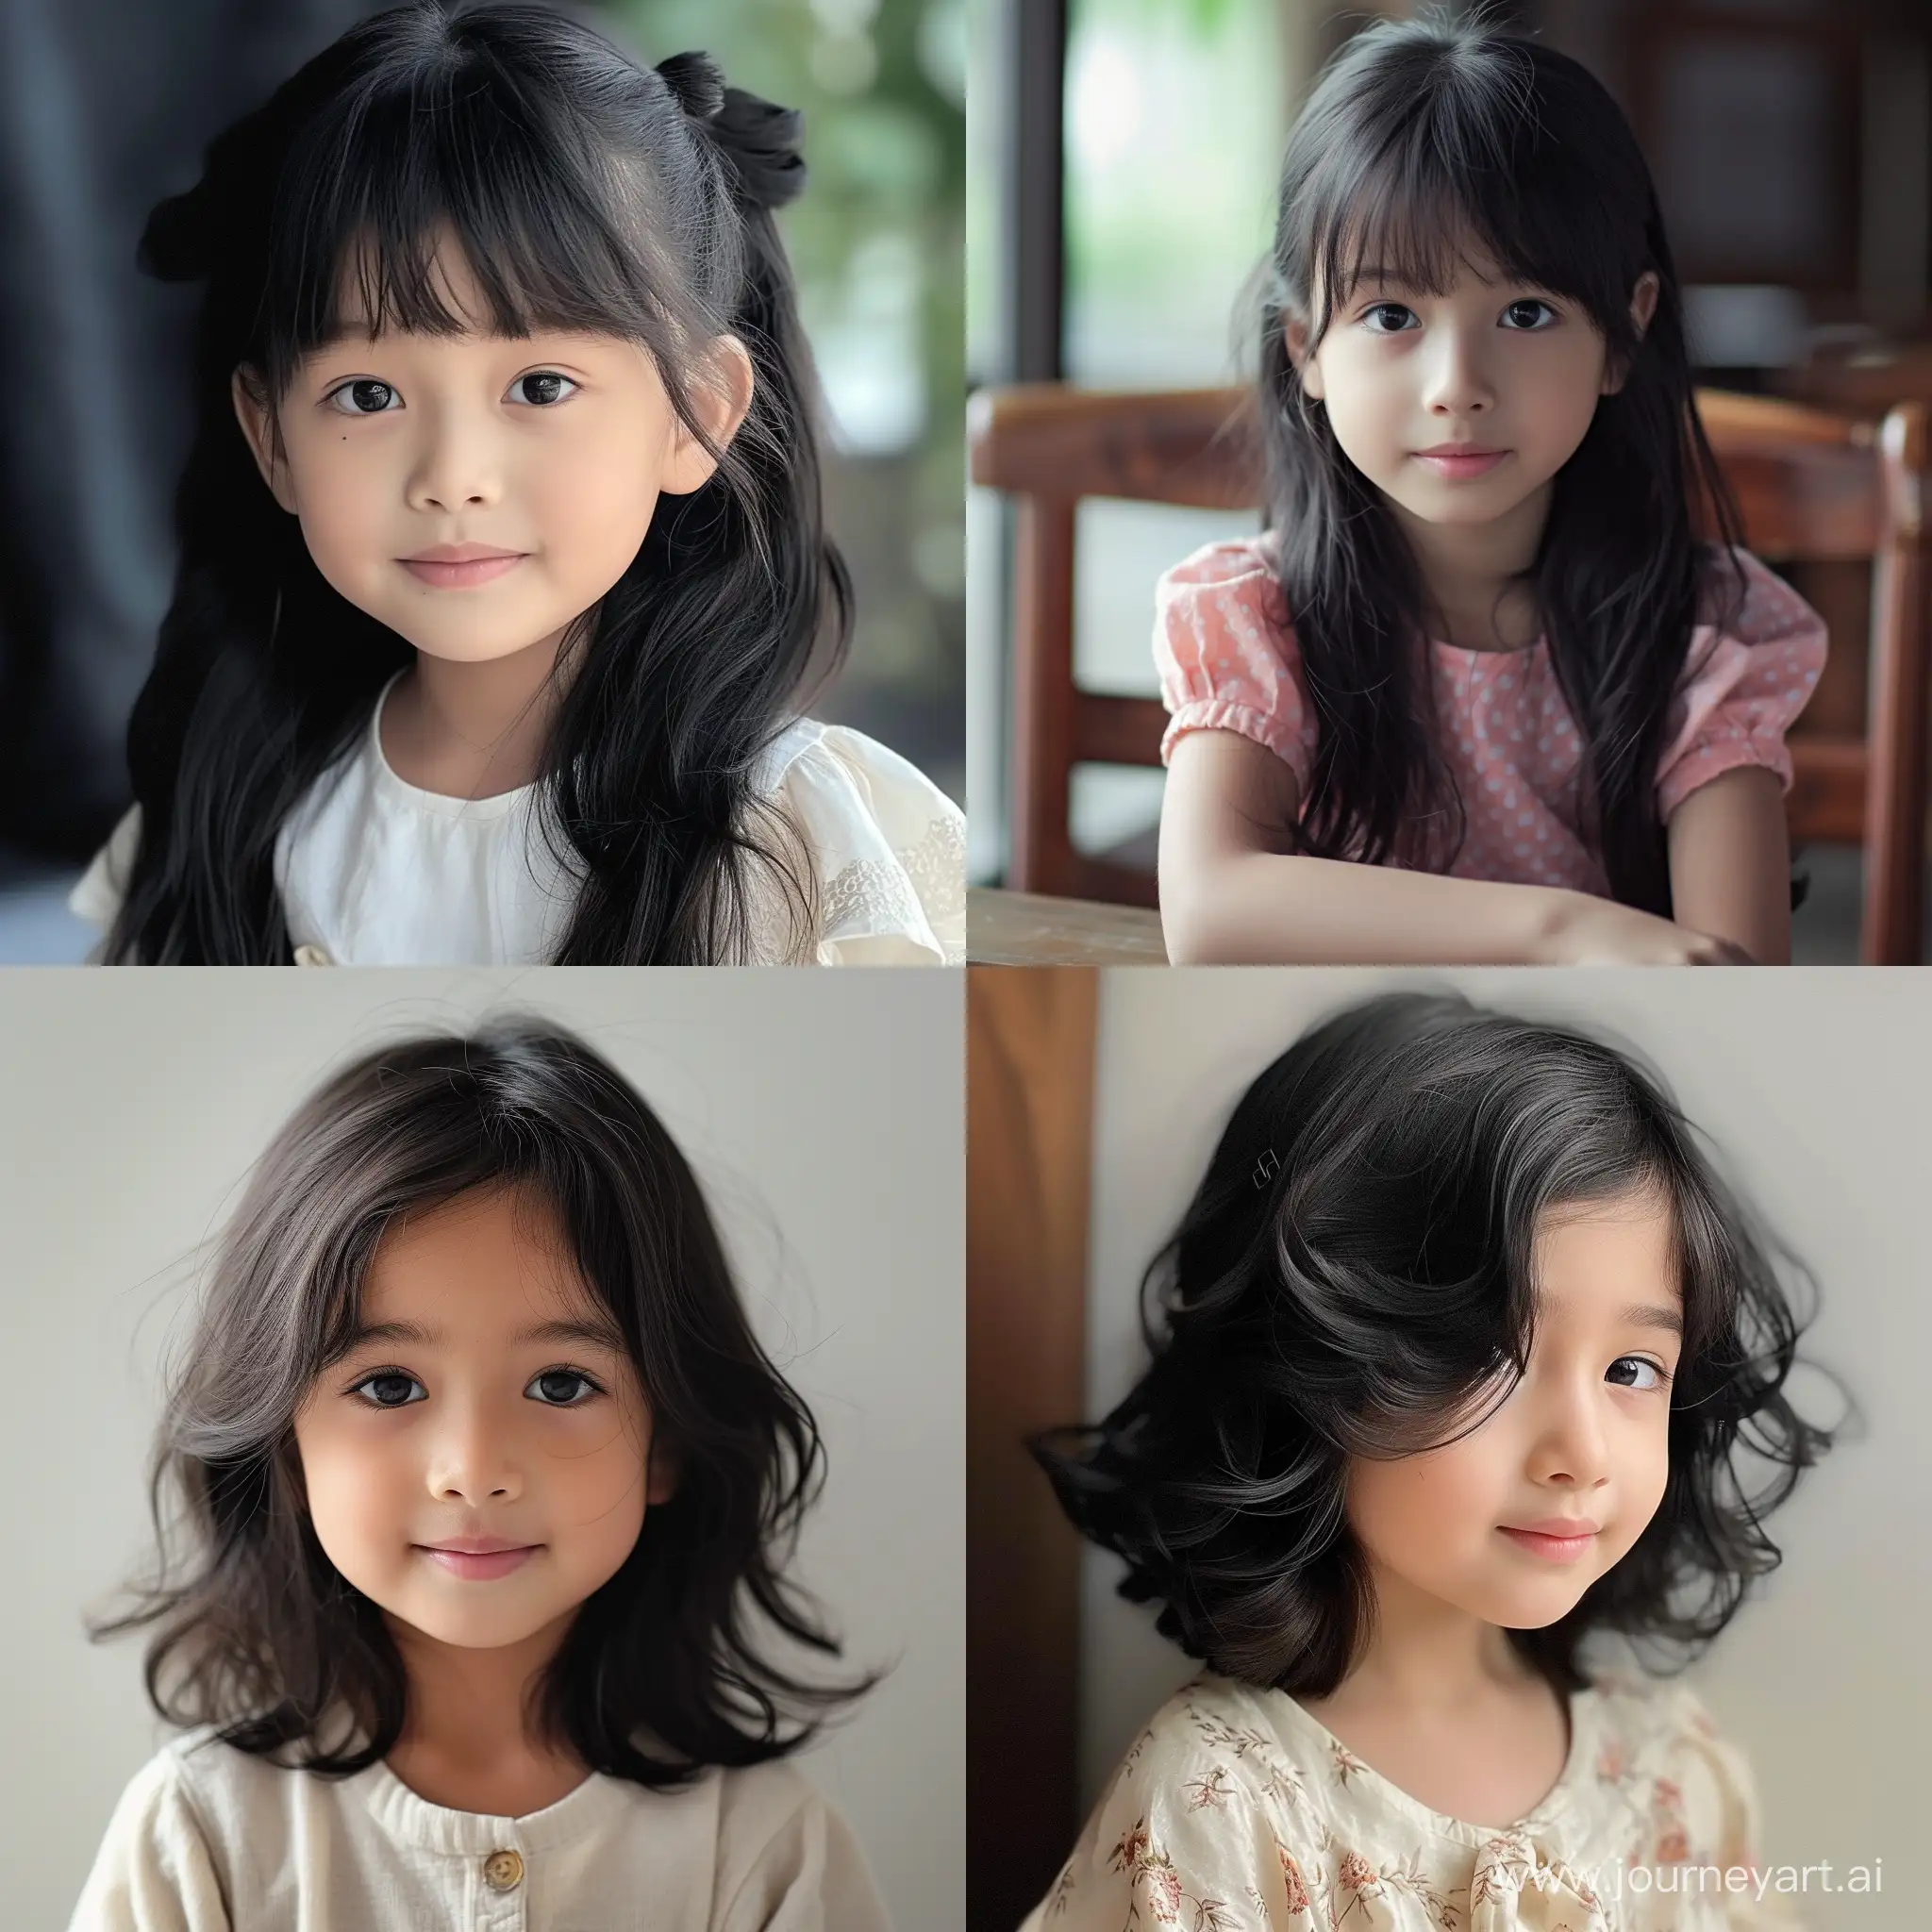 Adorable-10YearOld-Girl-with-Smart-Appearance